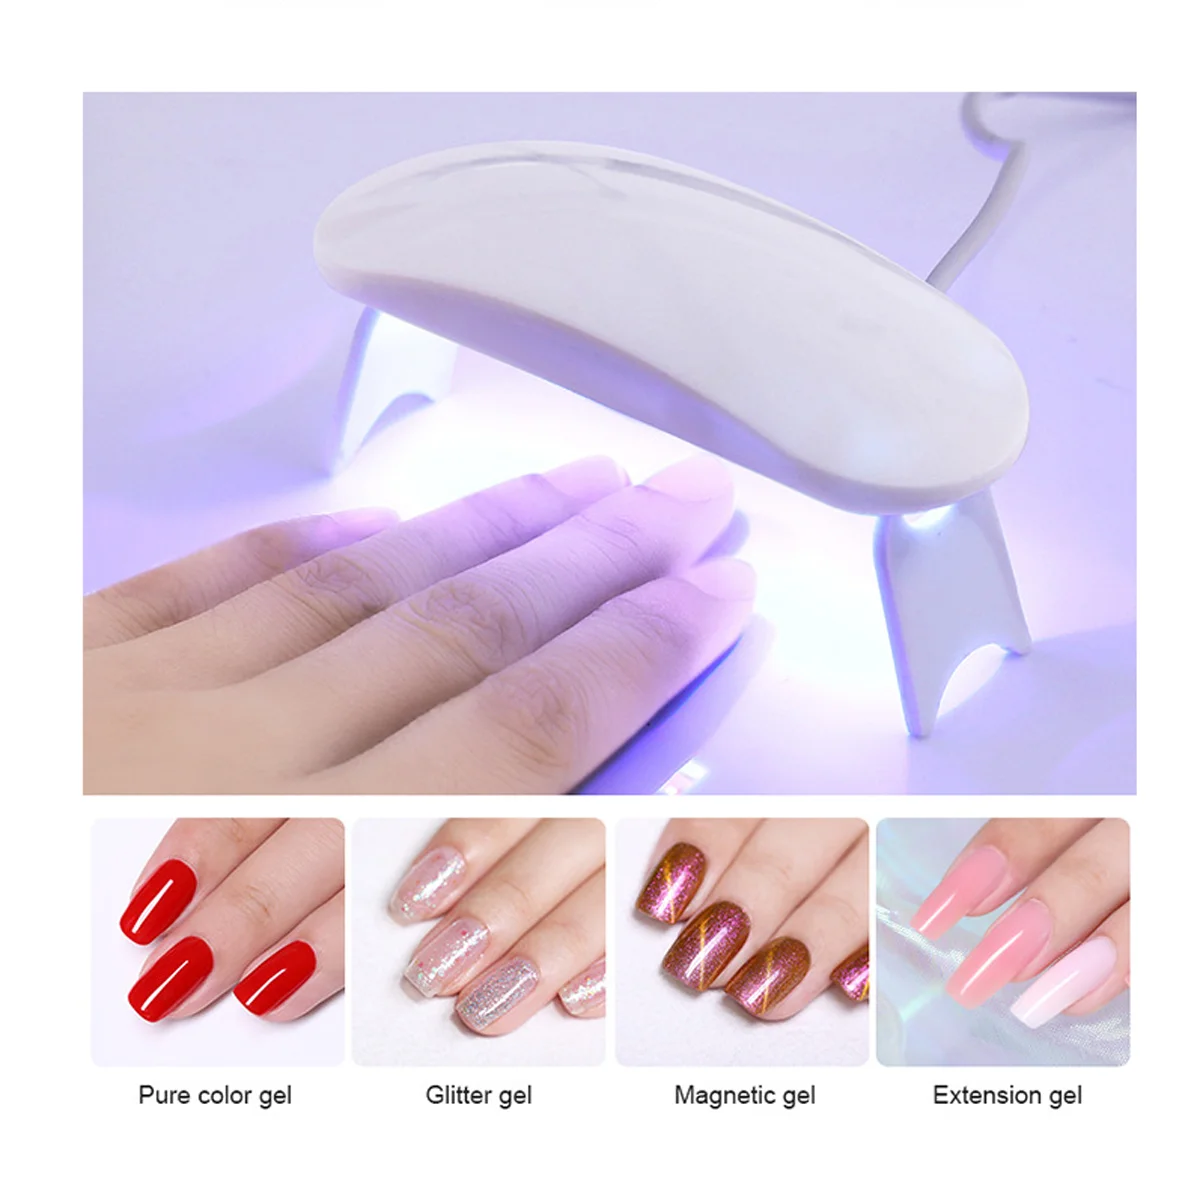 6w Professional Salon Mini Nail Dryer Solid Color Portable Uv Led Lamp Nail Phototherapy Machine Ladies Home Use Manicure Tool Nail Dryers Aliexpress